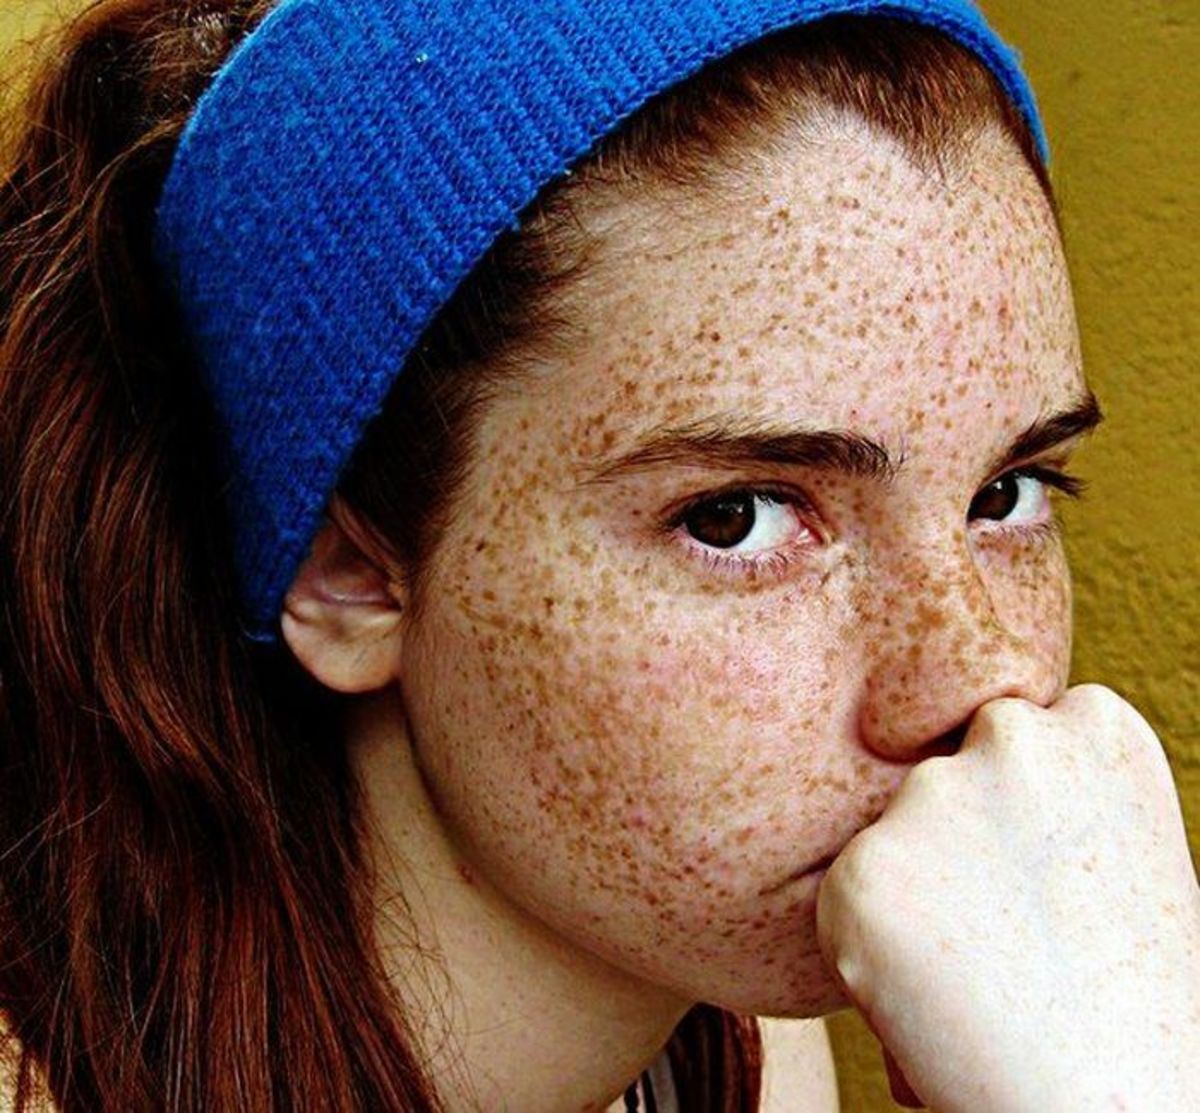 my-flawless-skin-thanks-to-obagi-the-best-for-removal-freckles